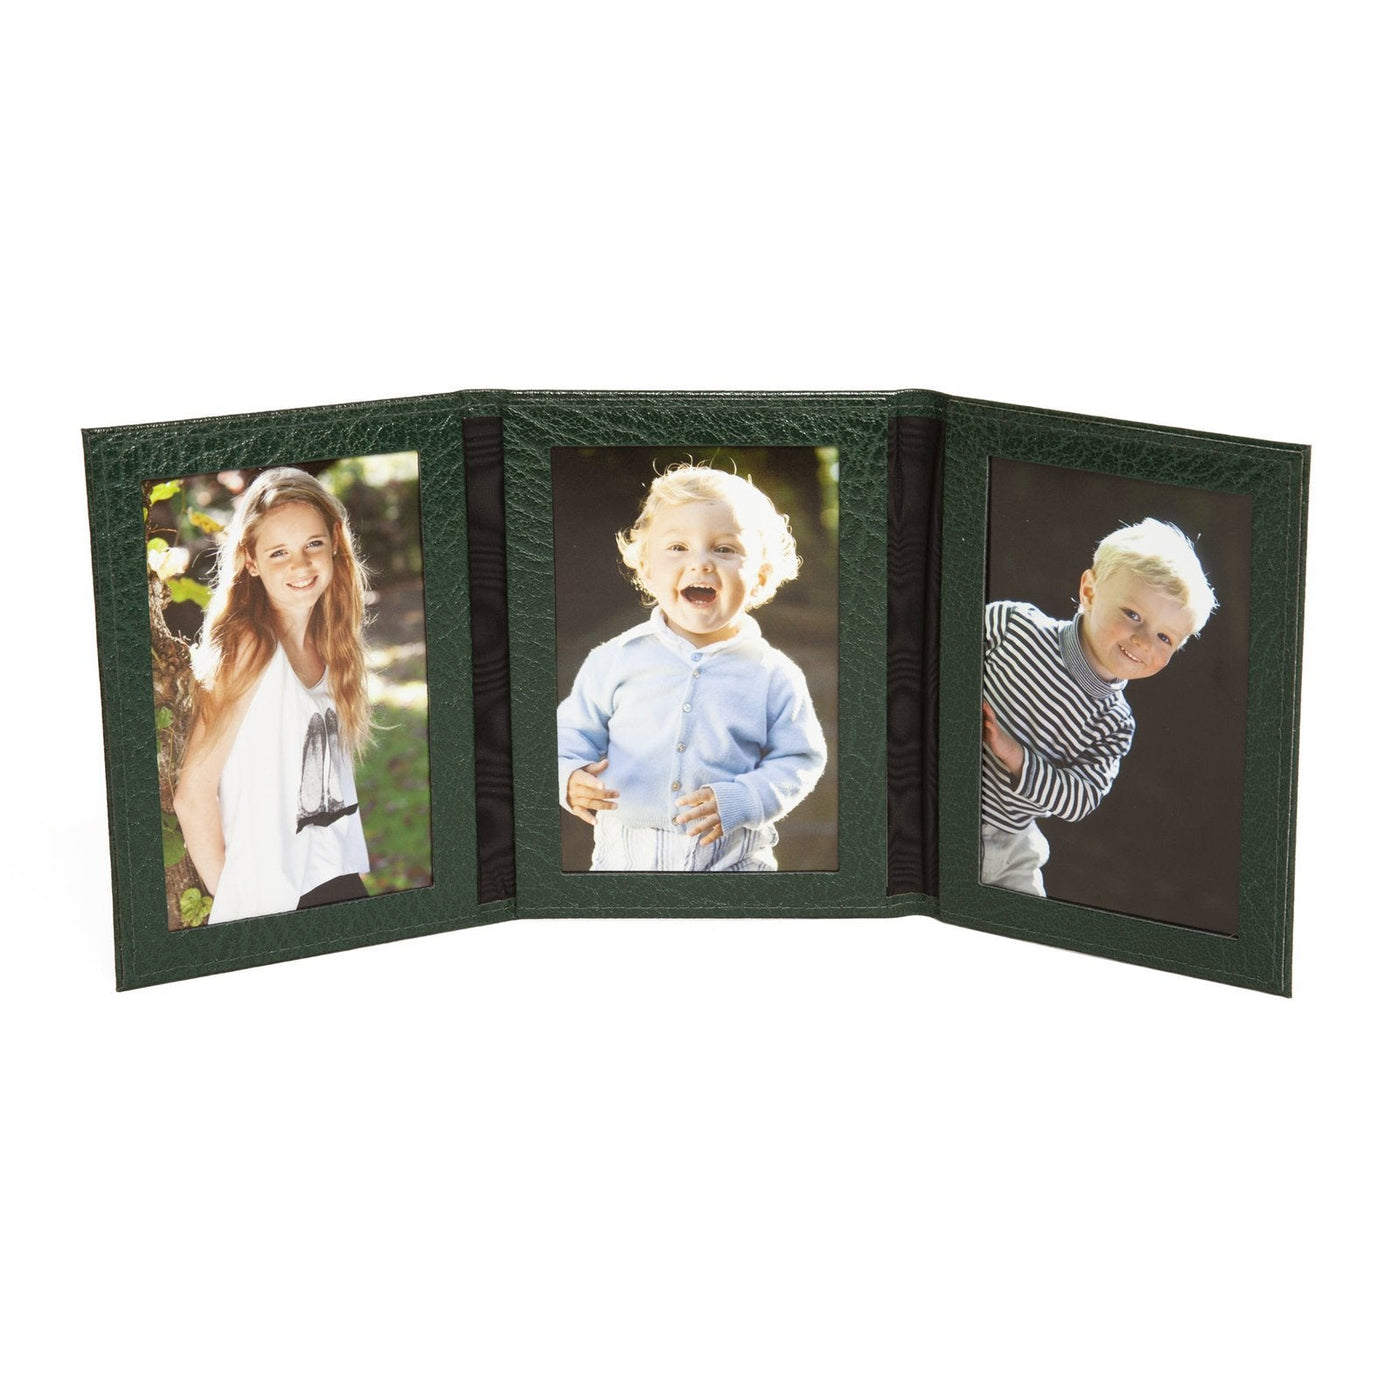 Moroccan Leather Travel Triple Photo Frame